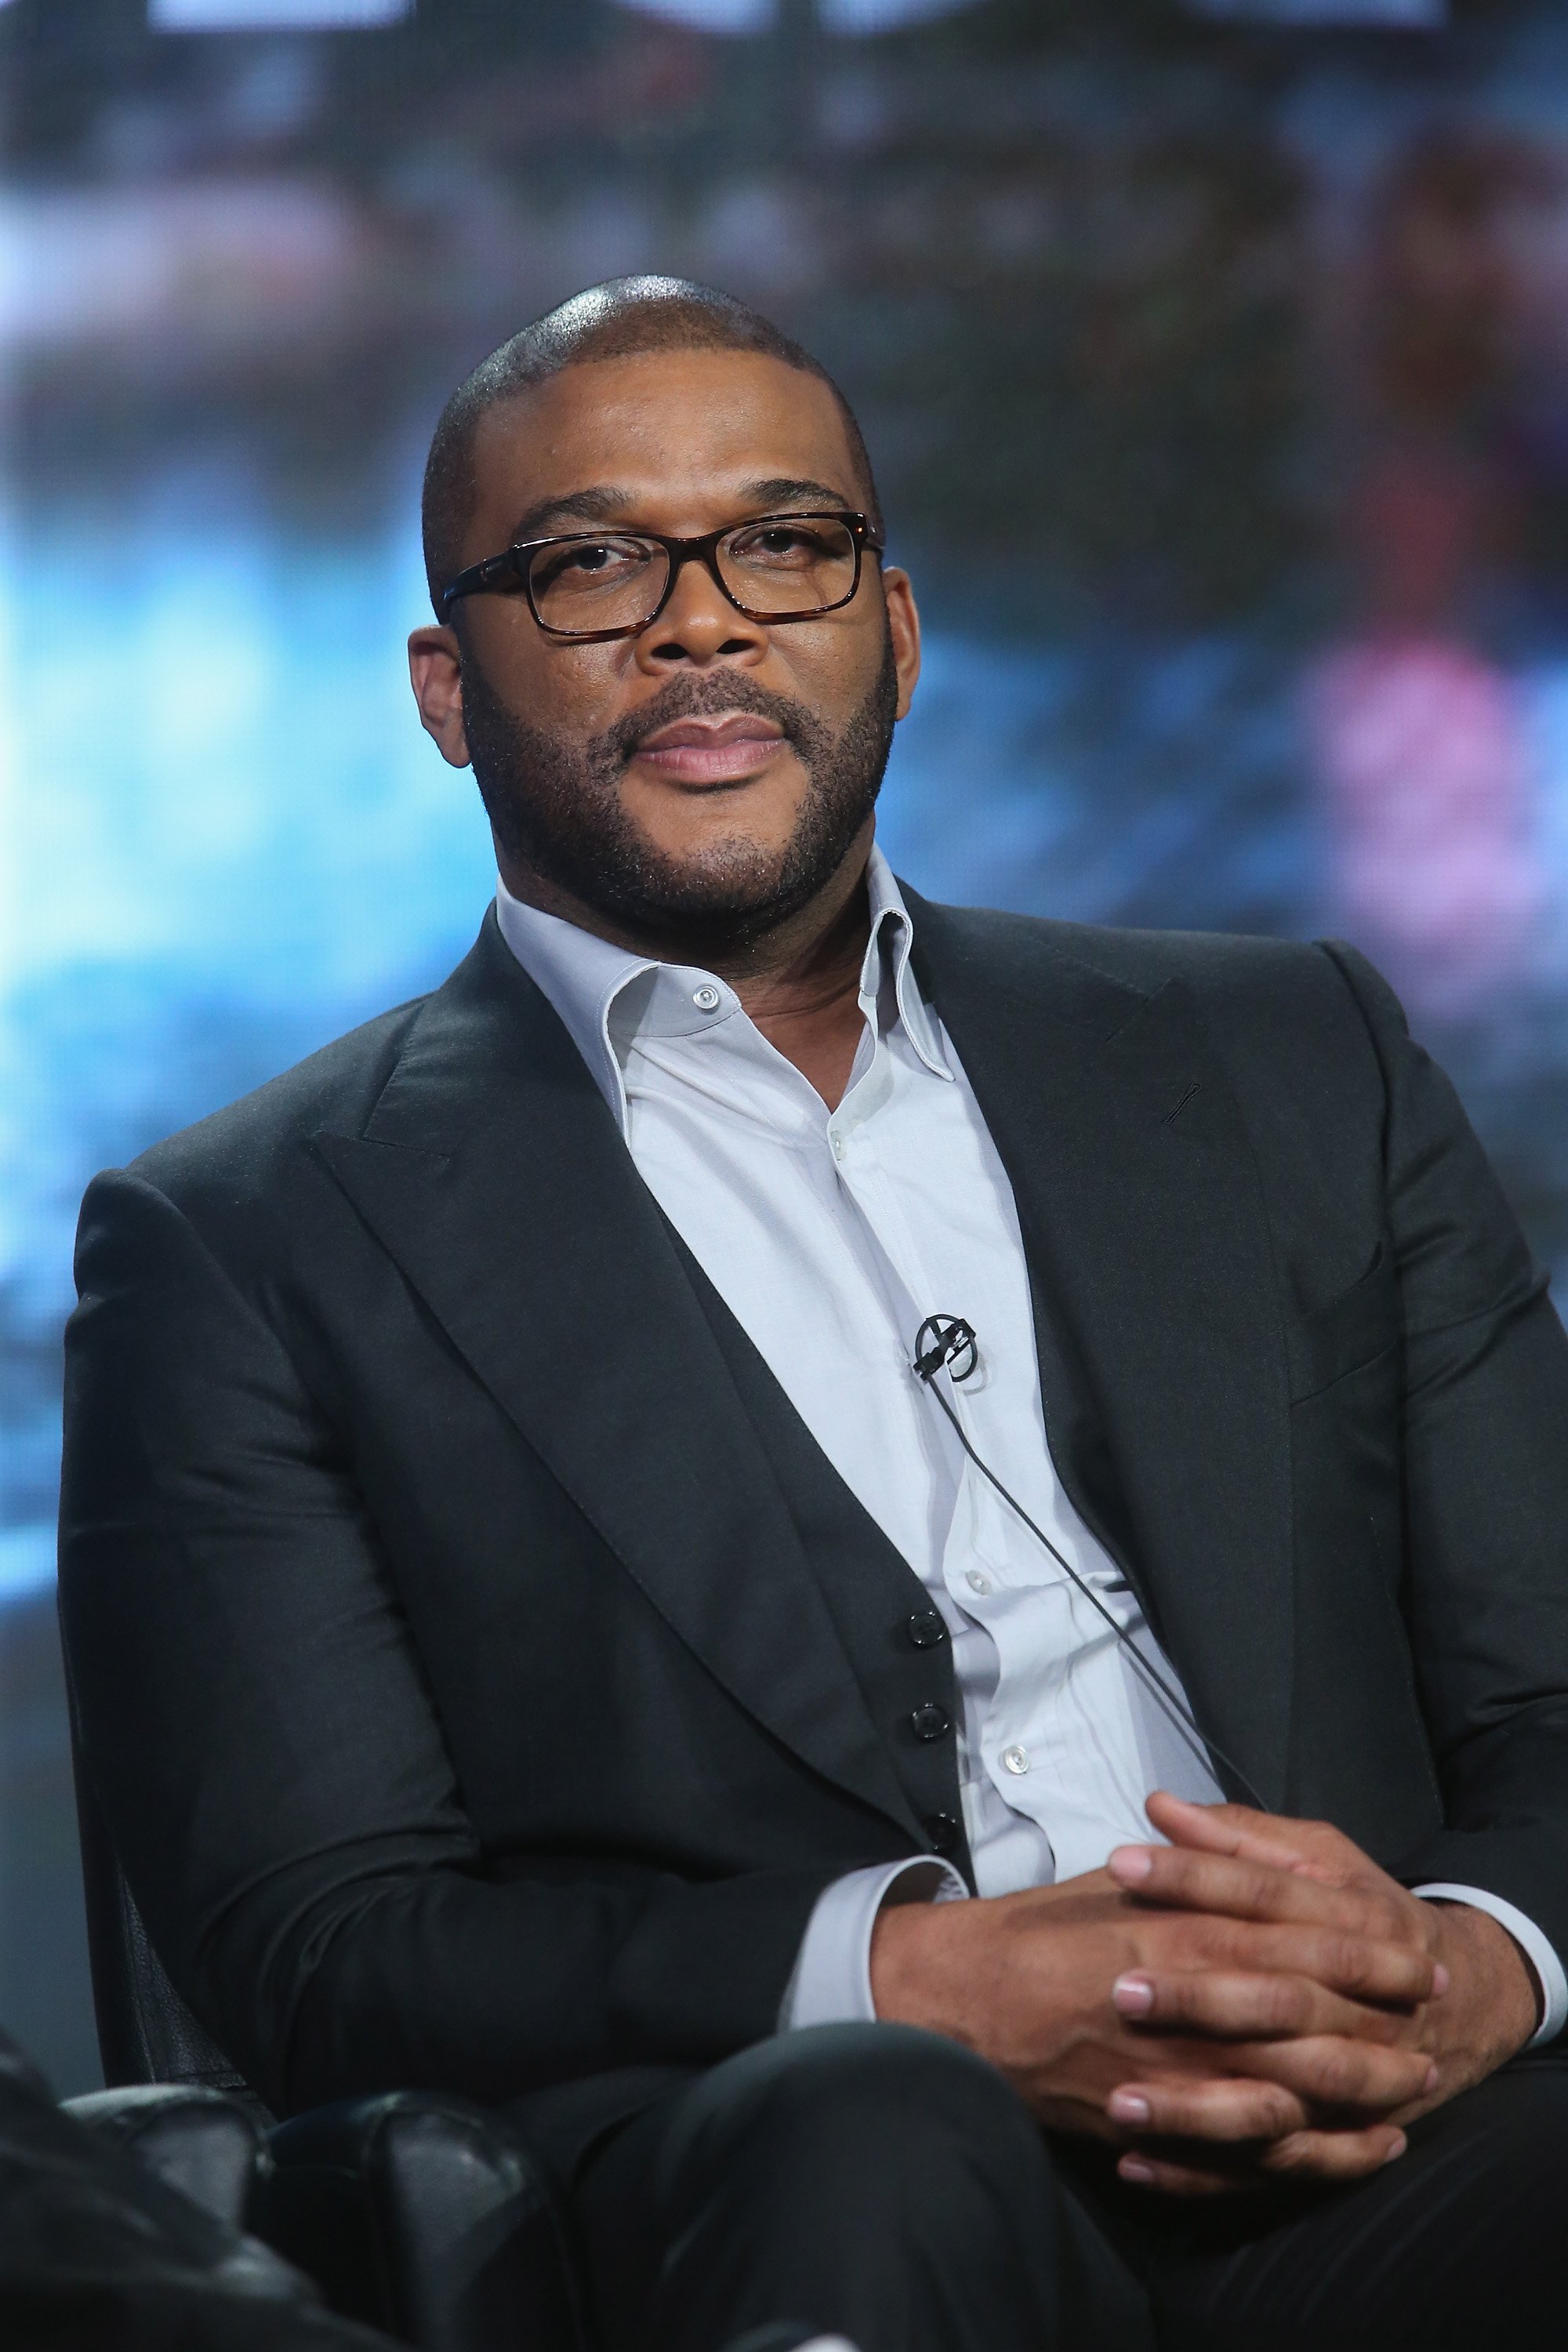 Tyler Perry during the 2015 Winter TCA Tour in Pasadena, California on Jan. 15, 2016 | Photo: Getty Images